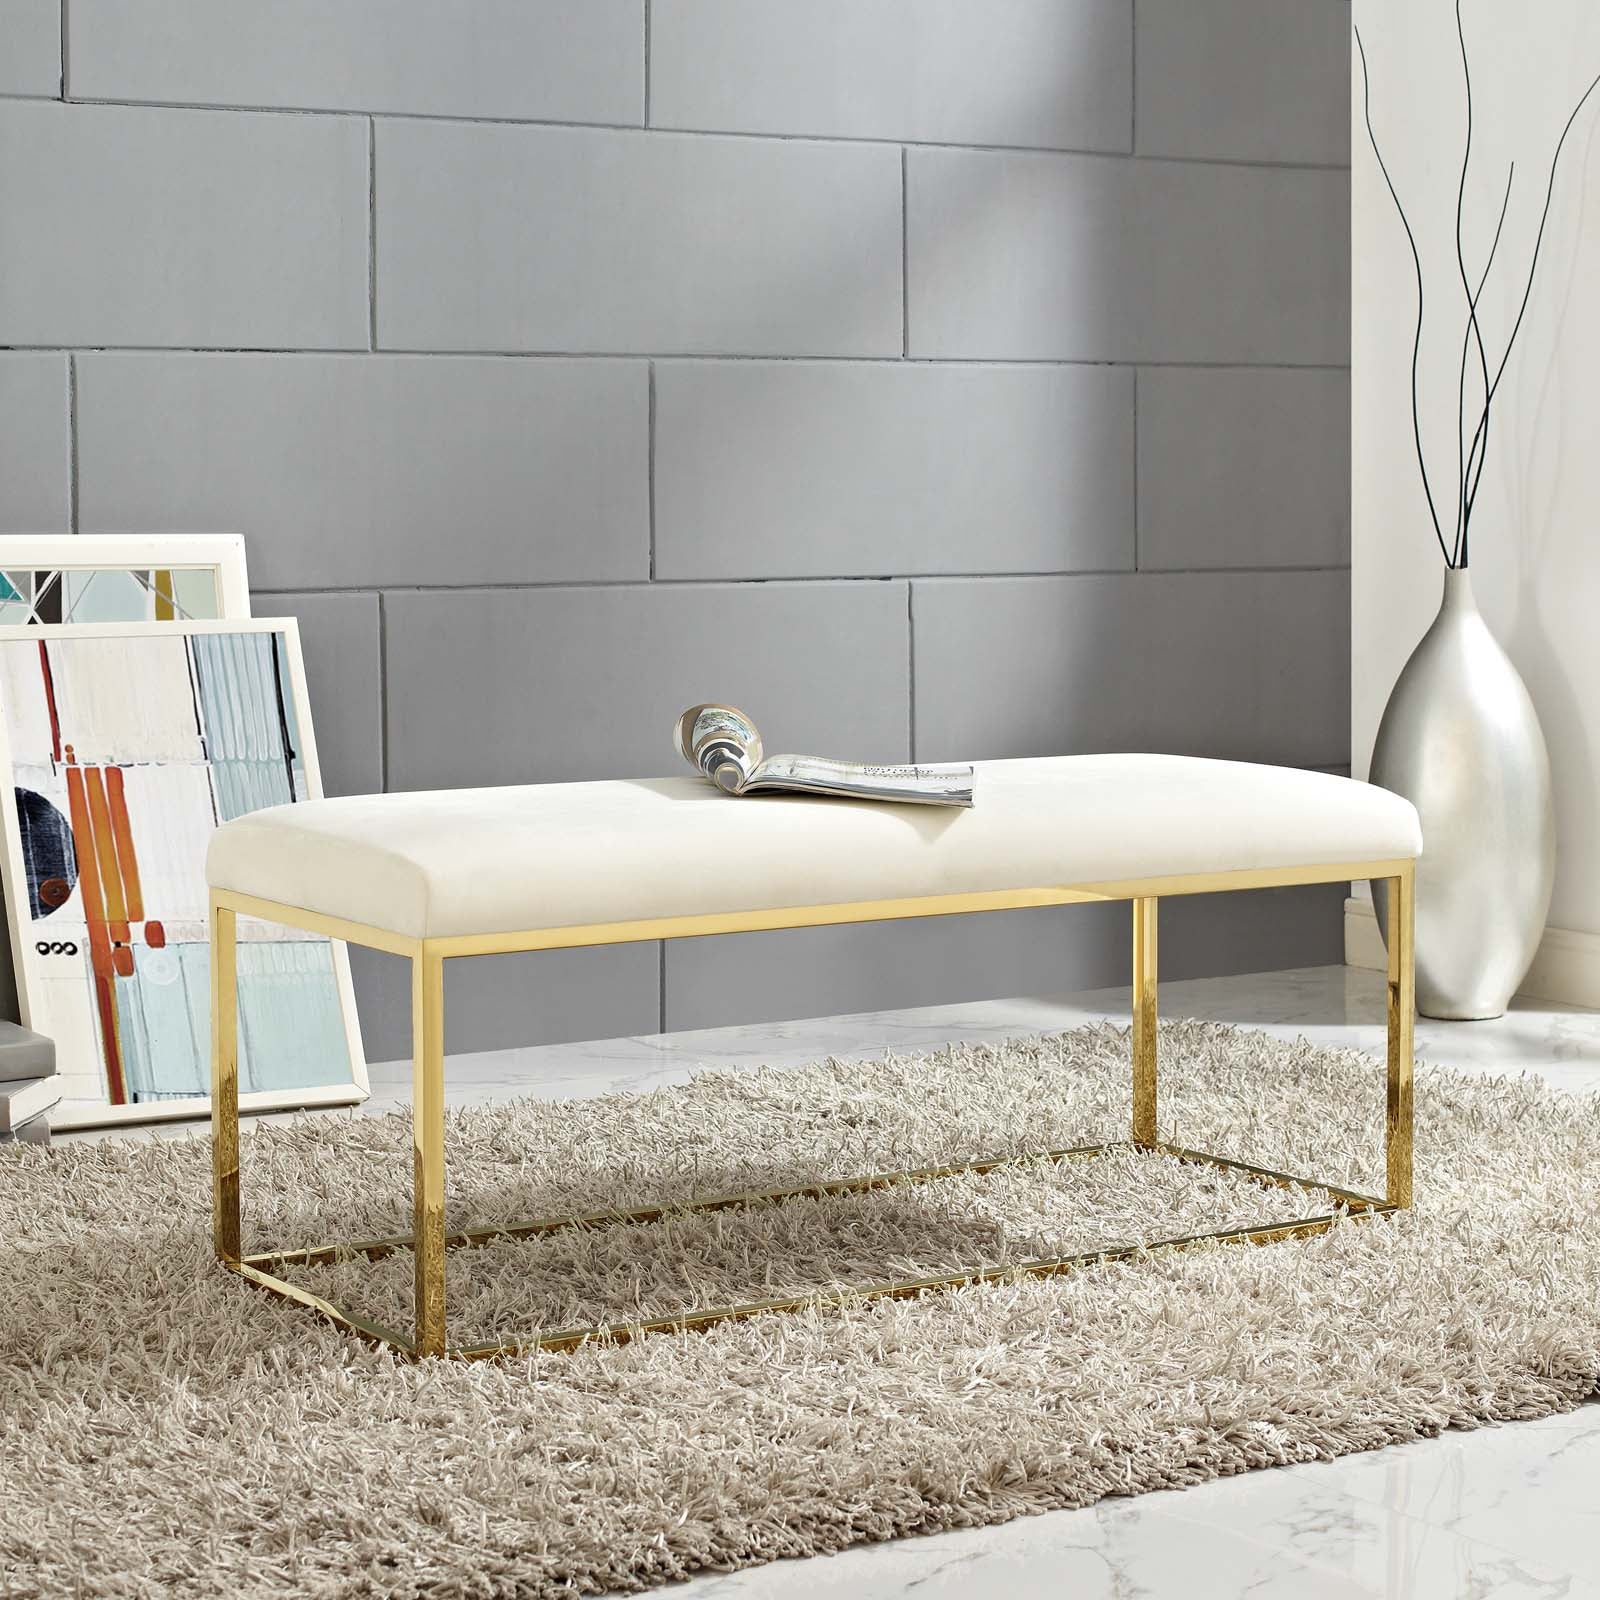 Modway Benches - Anticipate Fabric Bench Gold Ivory